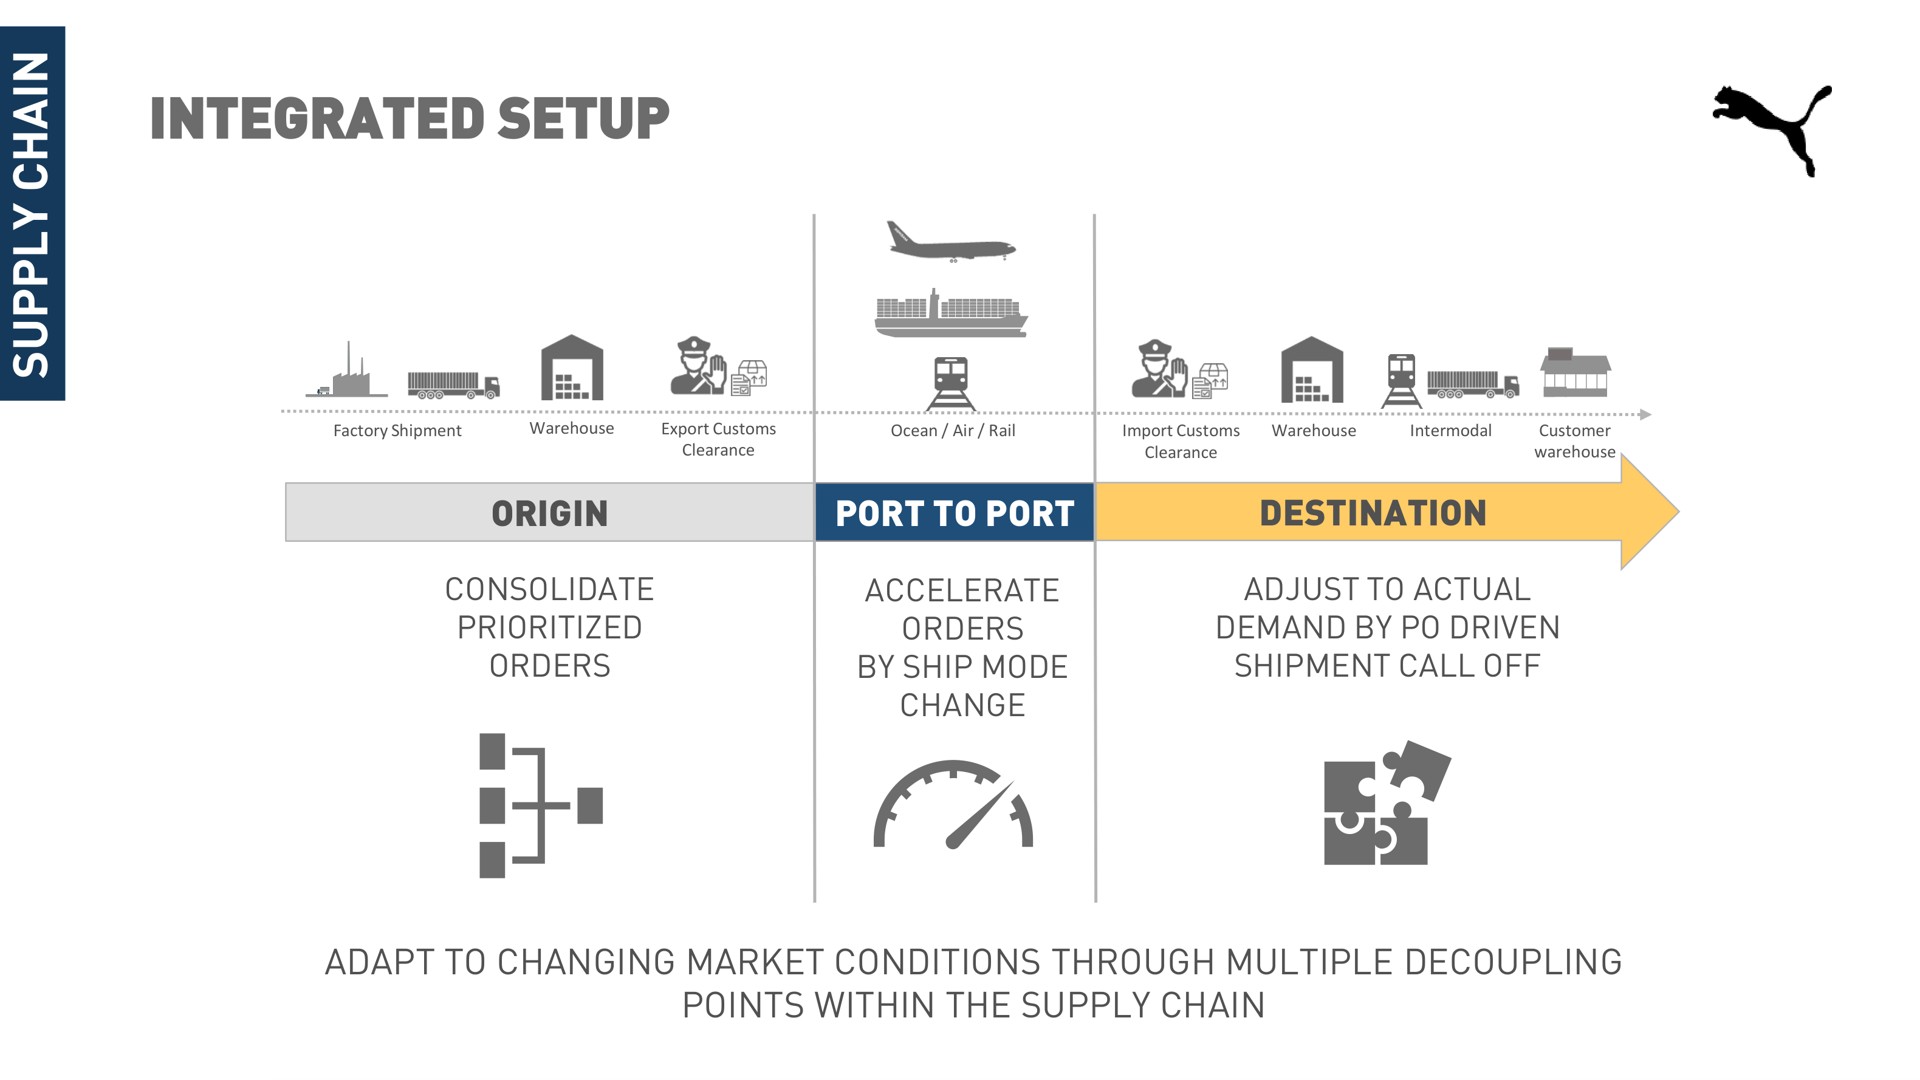 integrated setup a be a a gem origin a a a destination i adapt to changing market conditions through multiple points within the supply chain | Maersk